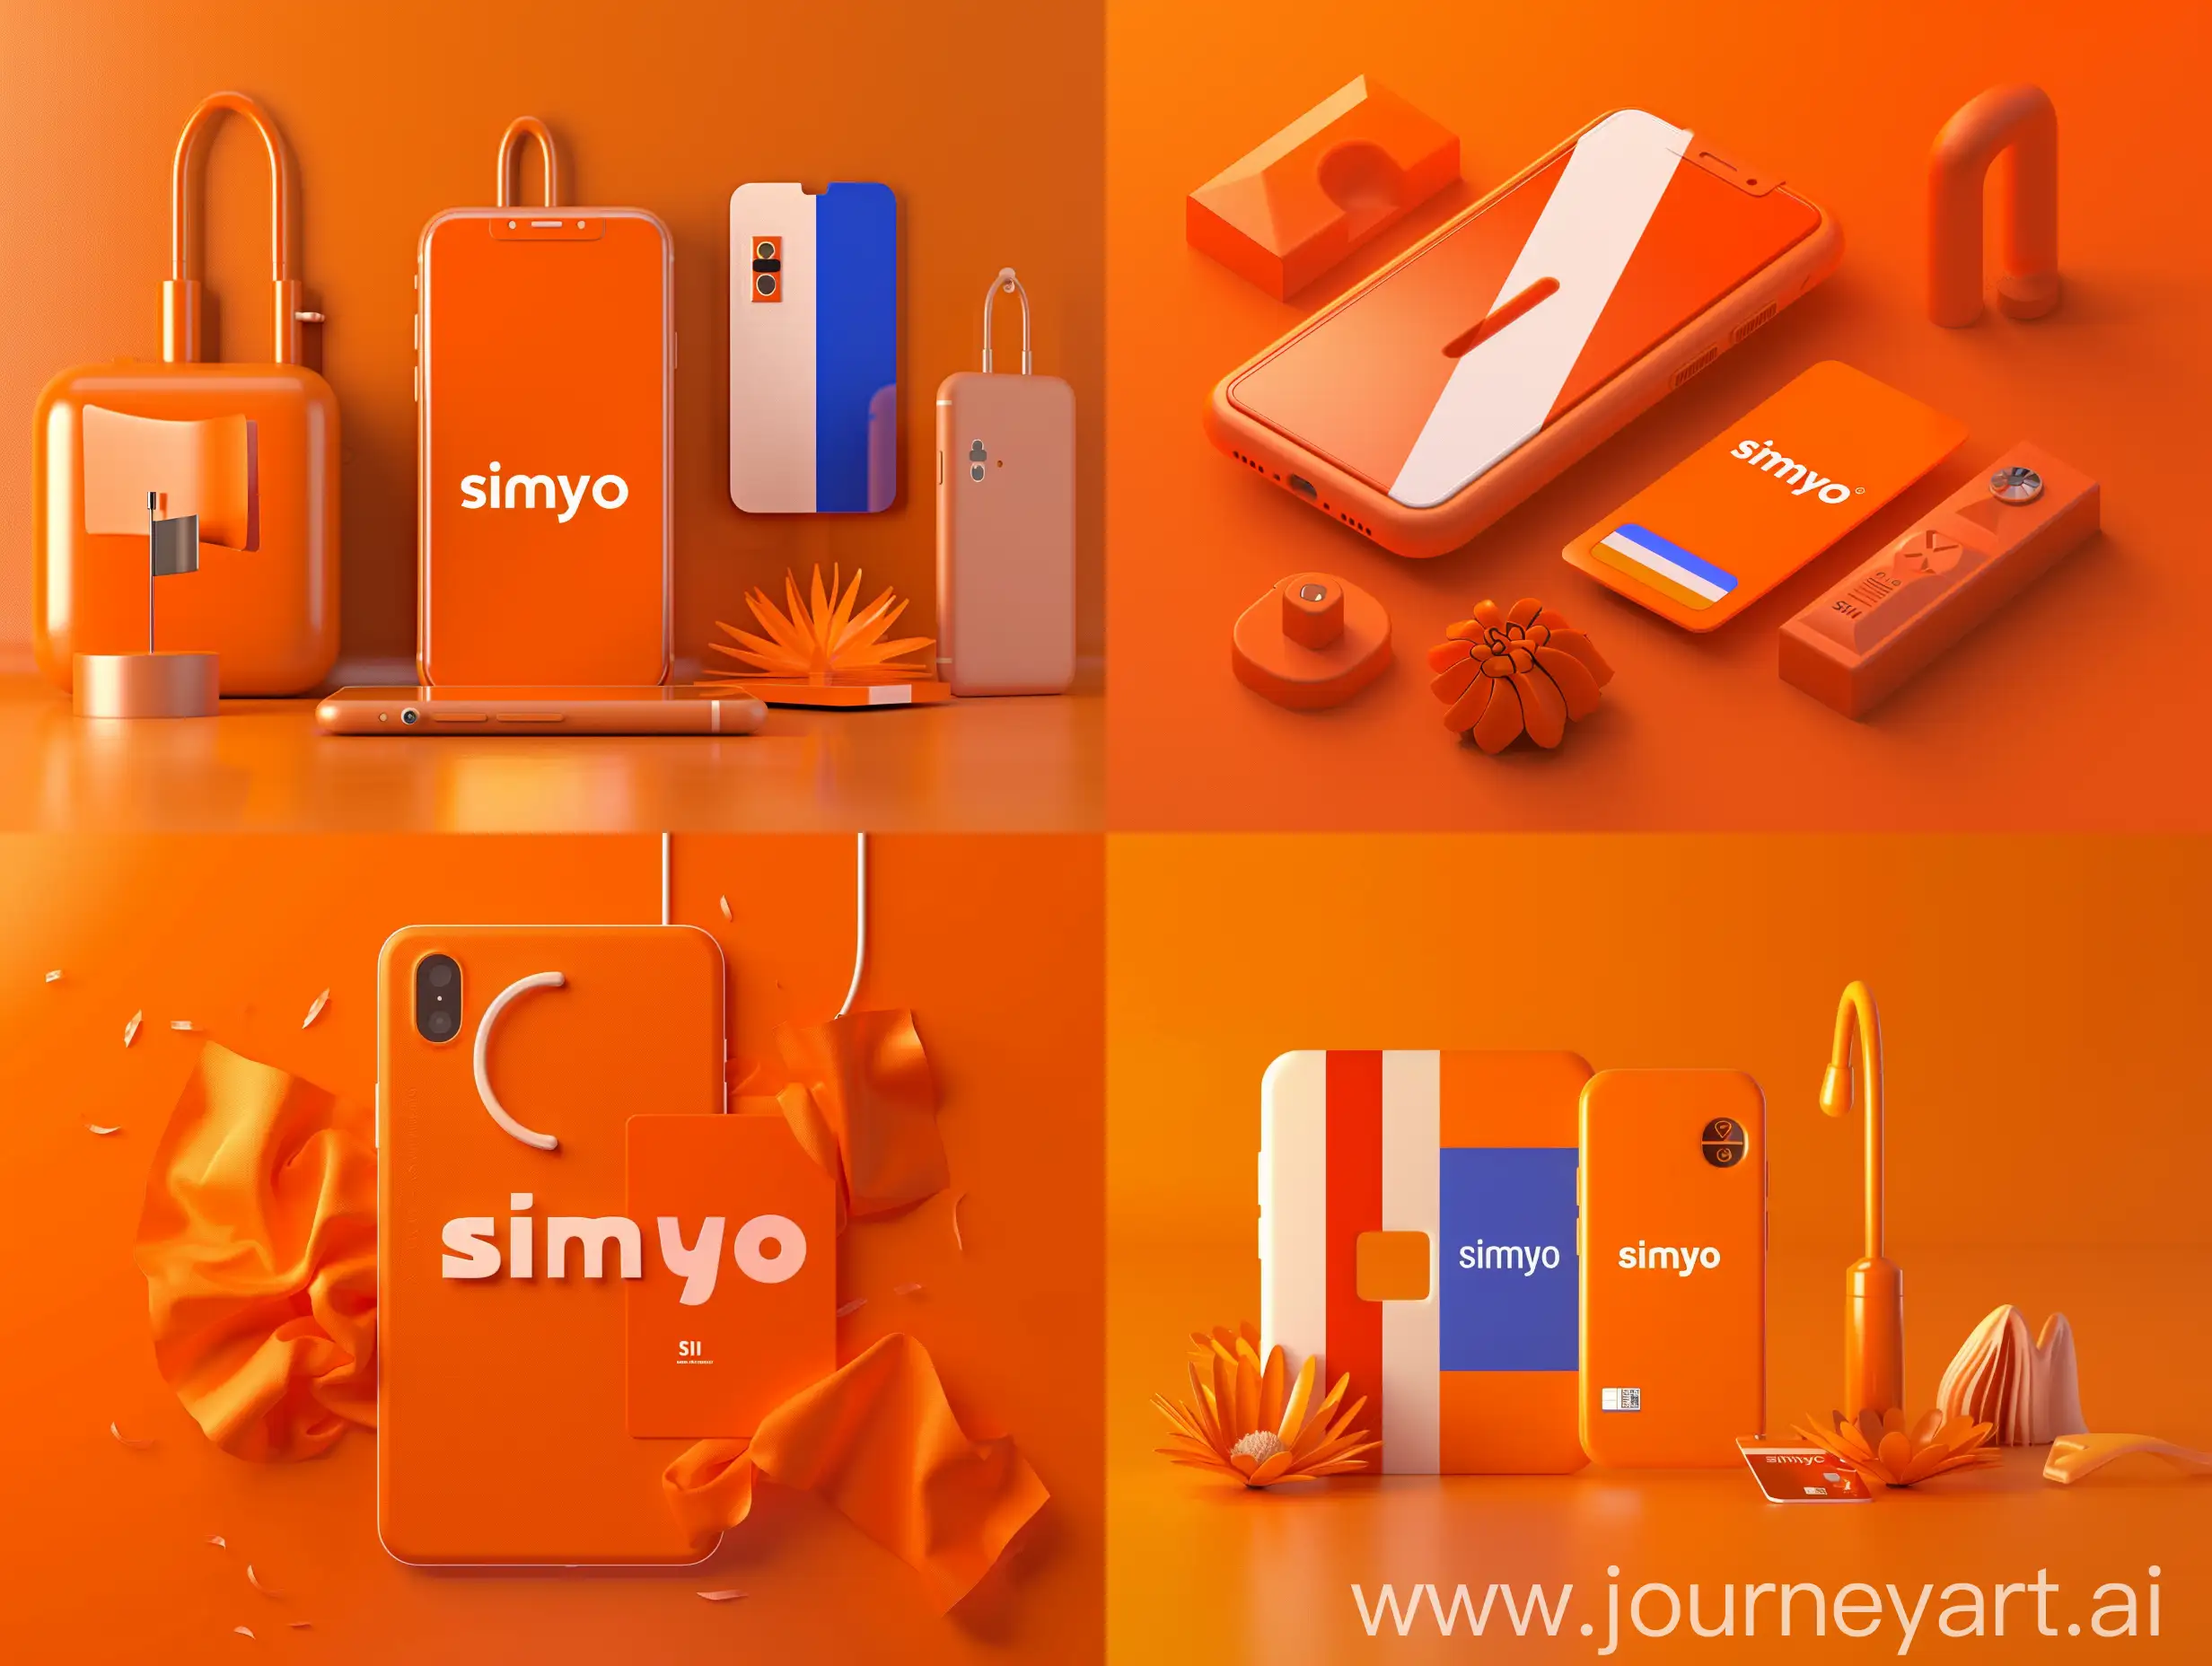 Create an image where orange is the dominant color, and include the text 'simyo'. Incorporate elements of the Dutch flag to represent the Netherlands. The theme of the image should relate to technology, mobile network operators, and SIM cards. The composition should be modern and innovative, highlighting the connection between telecommunications and national identity.